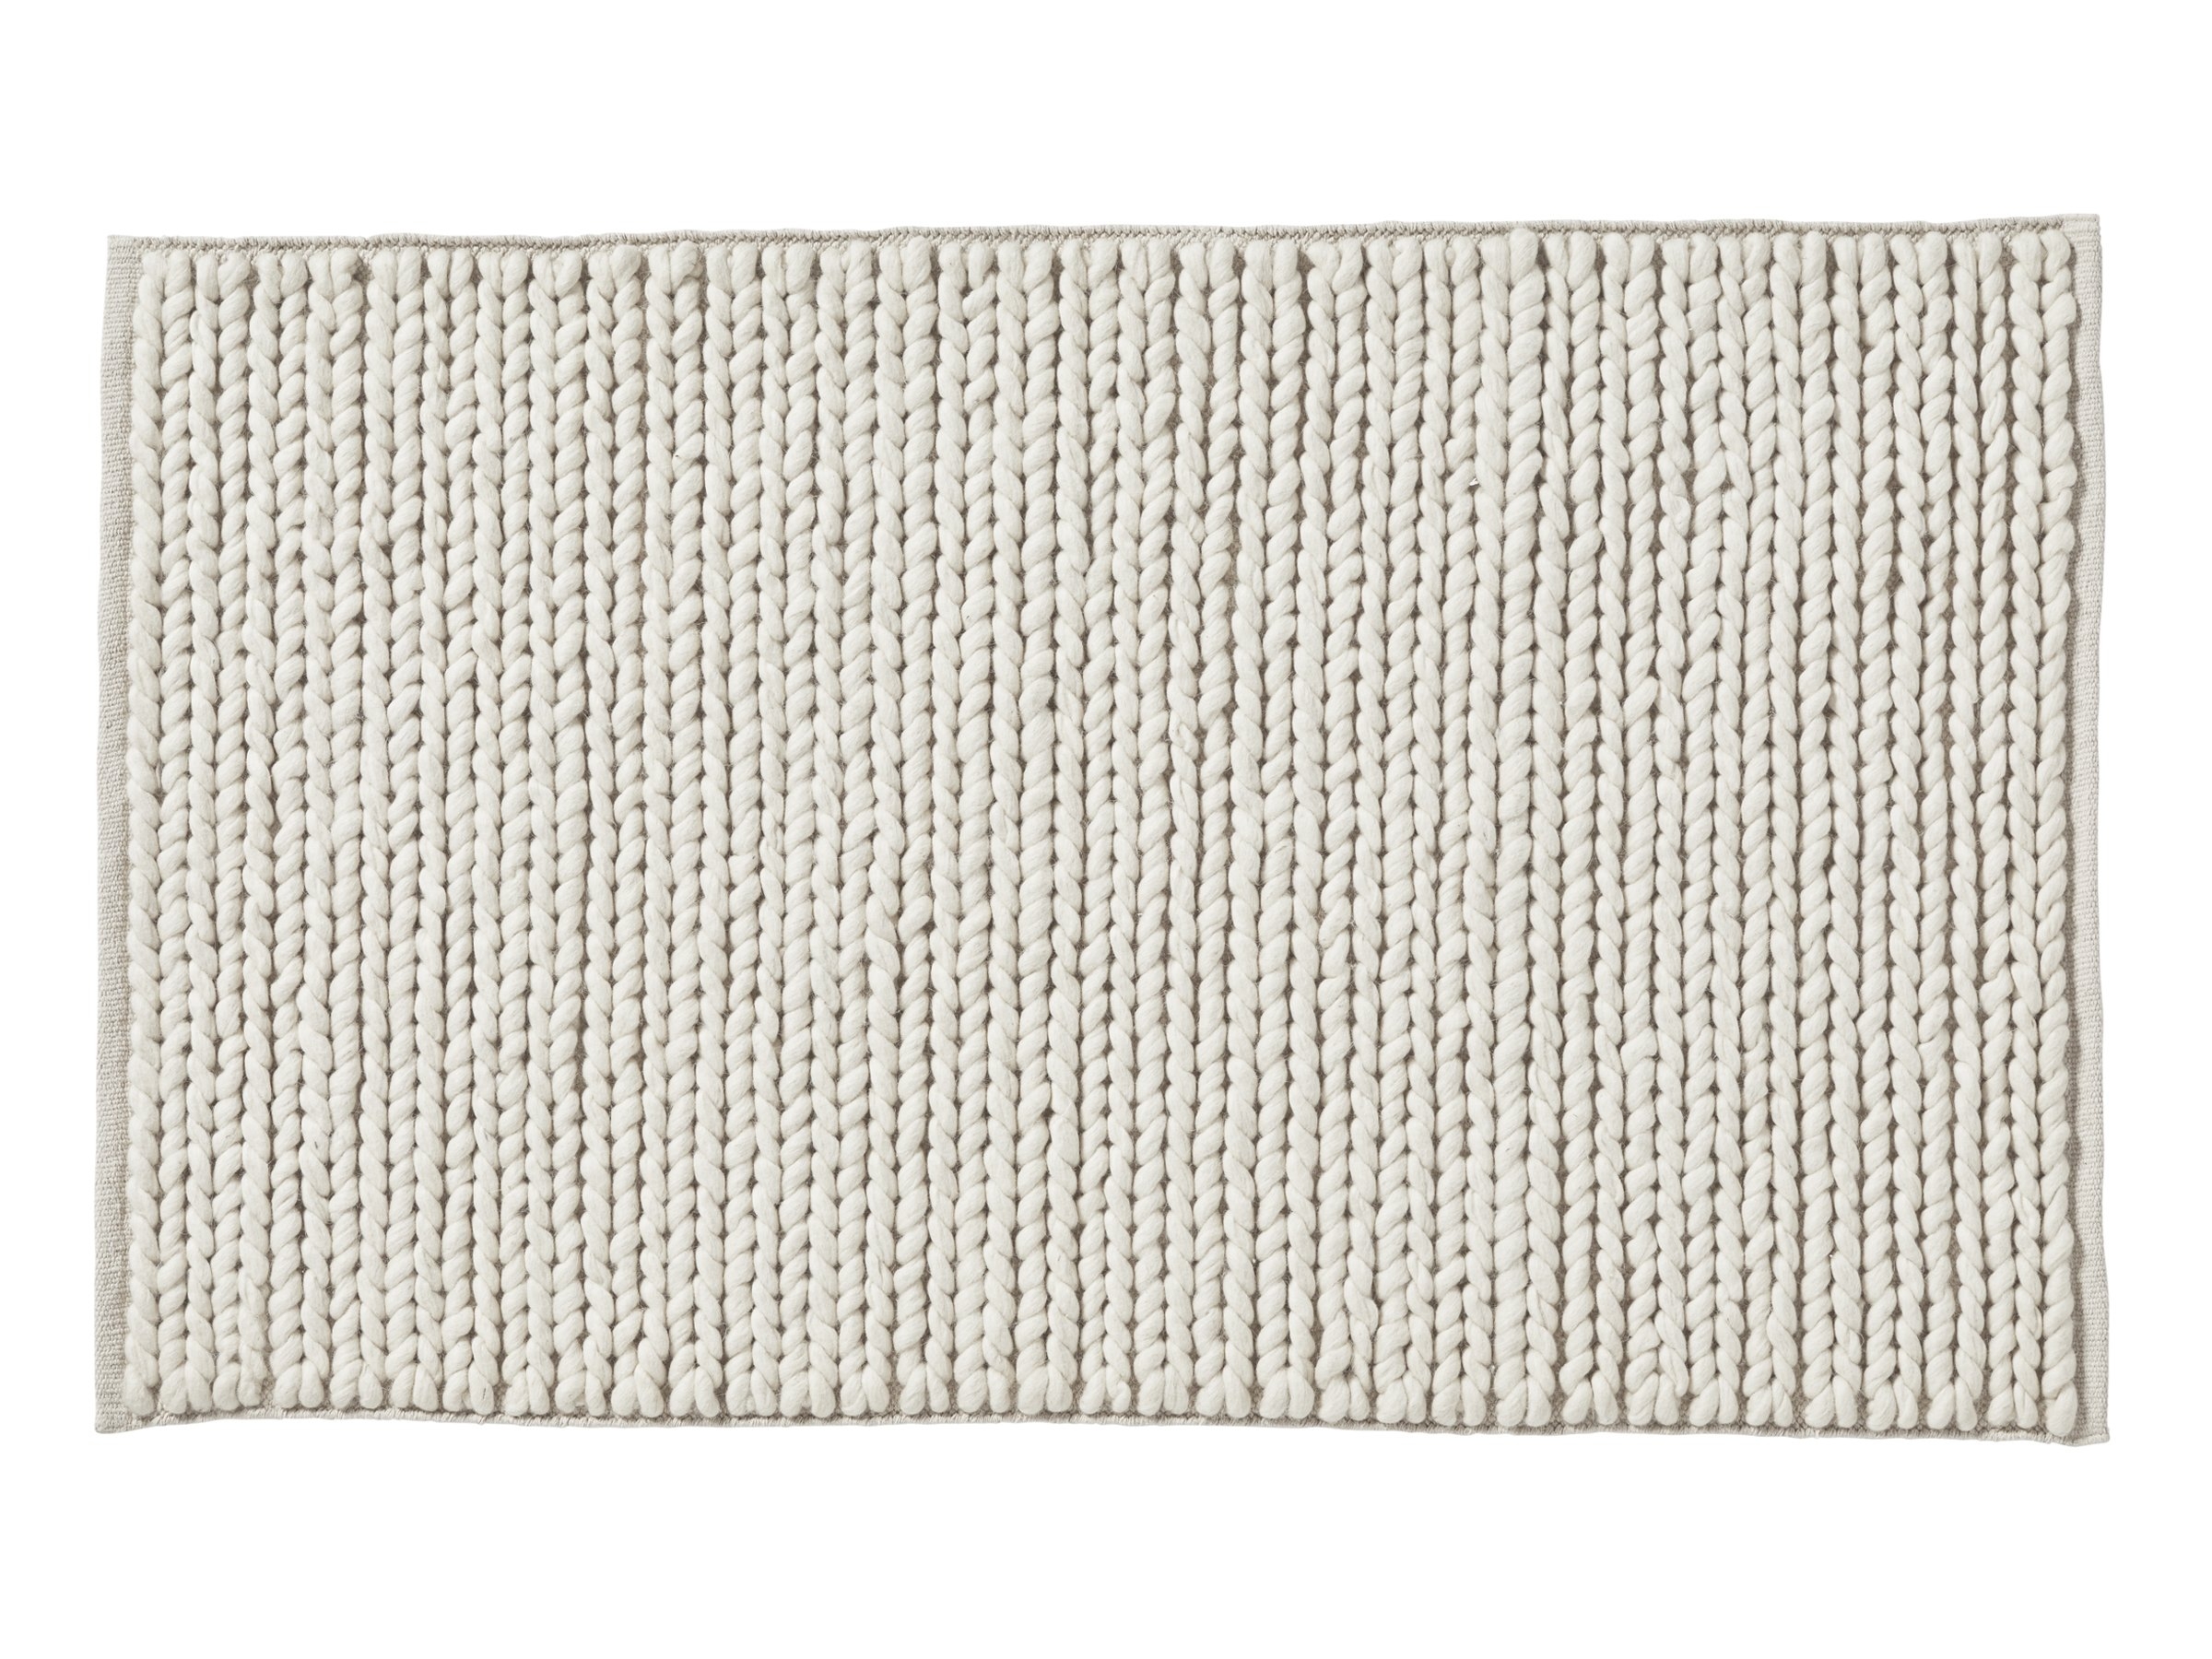 5' x 8' Braided Wool Rug in Ivory | Parachute - Image 0